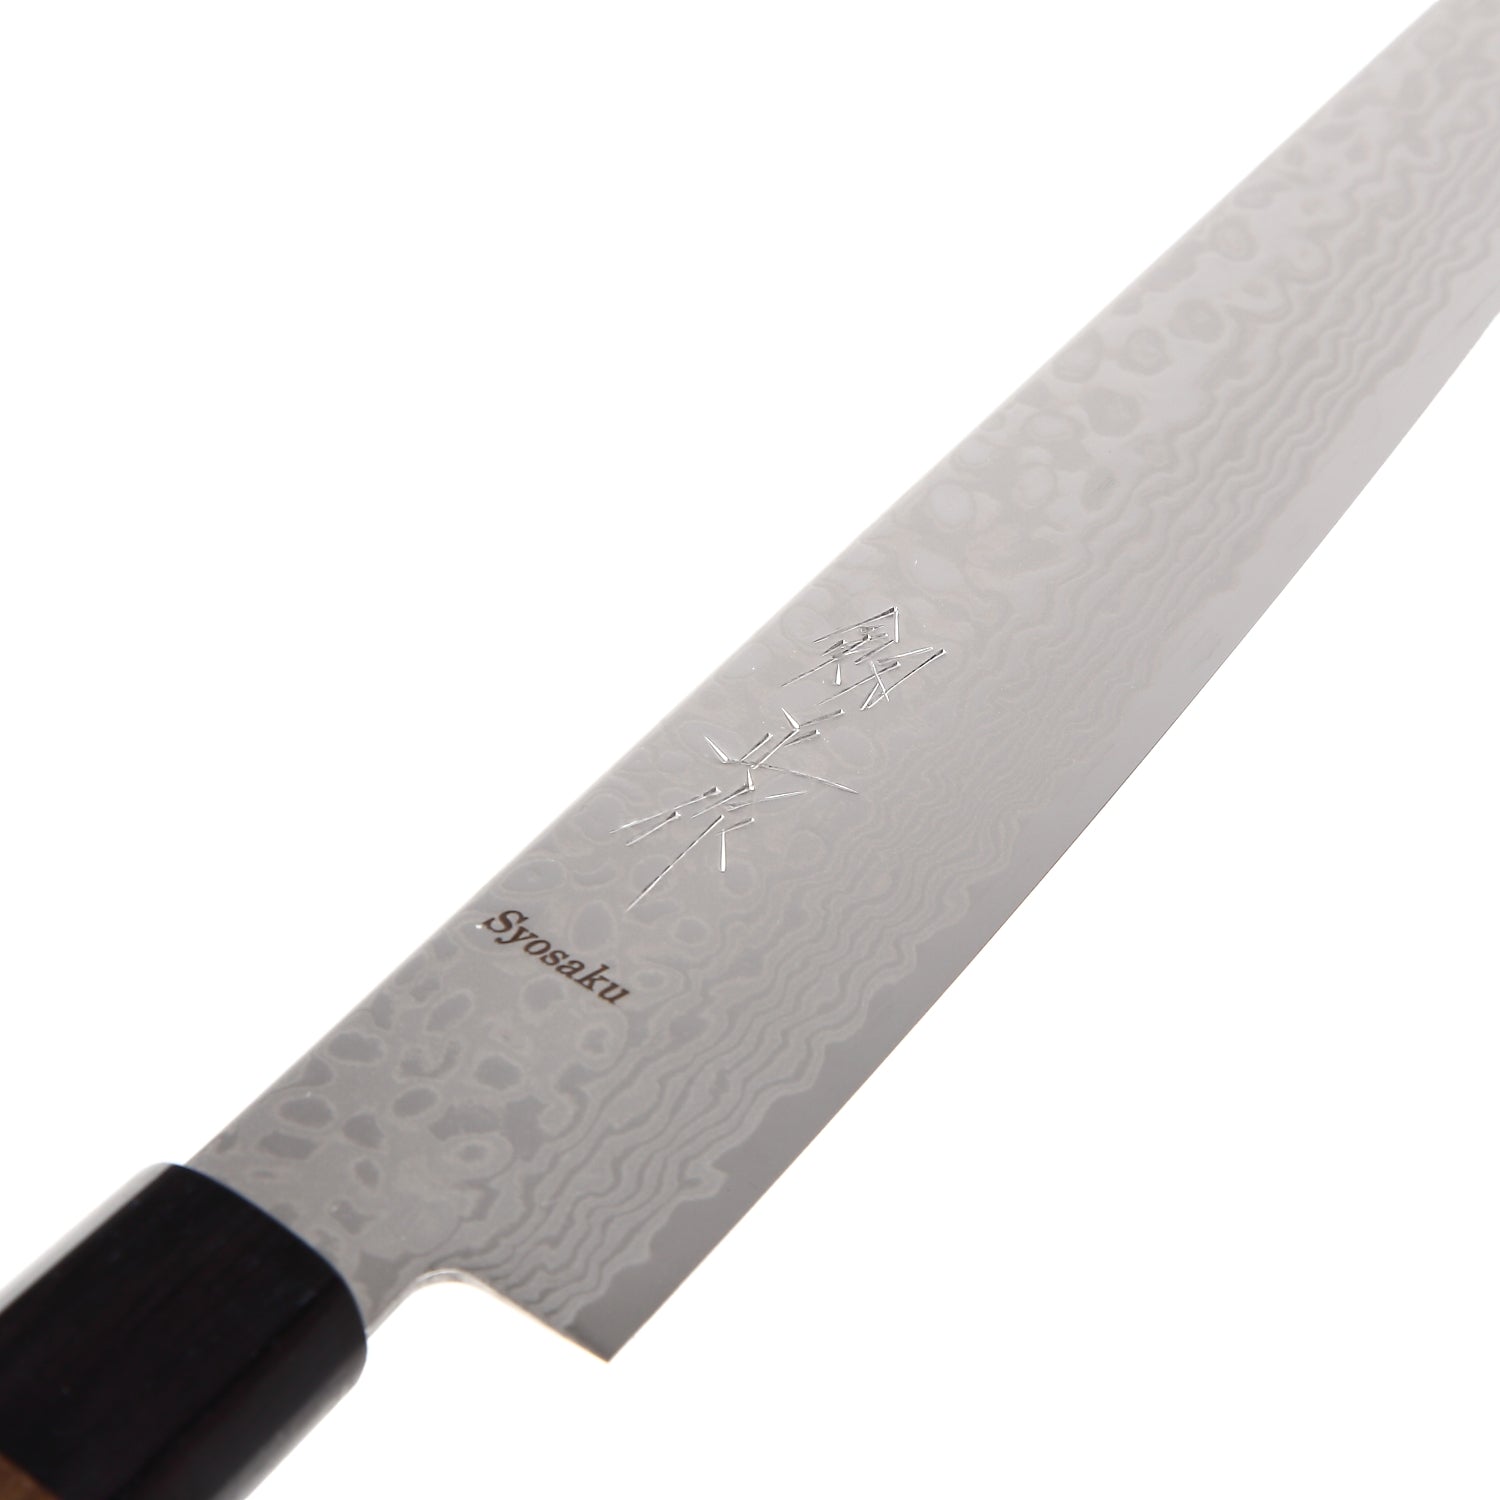 How to Use a Sujihiki (Japanese Carving Knife) 